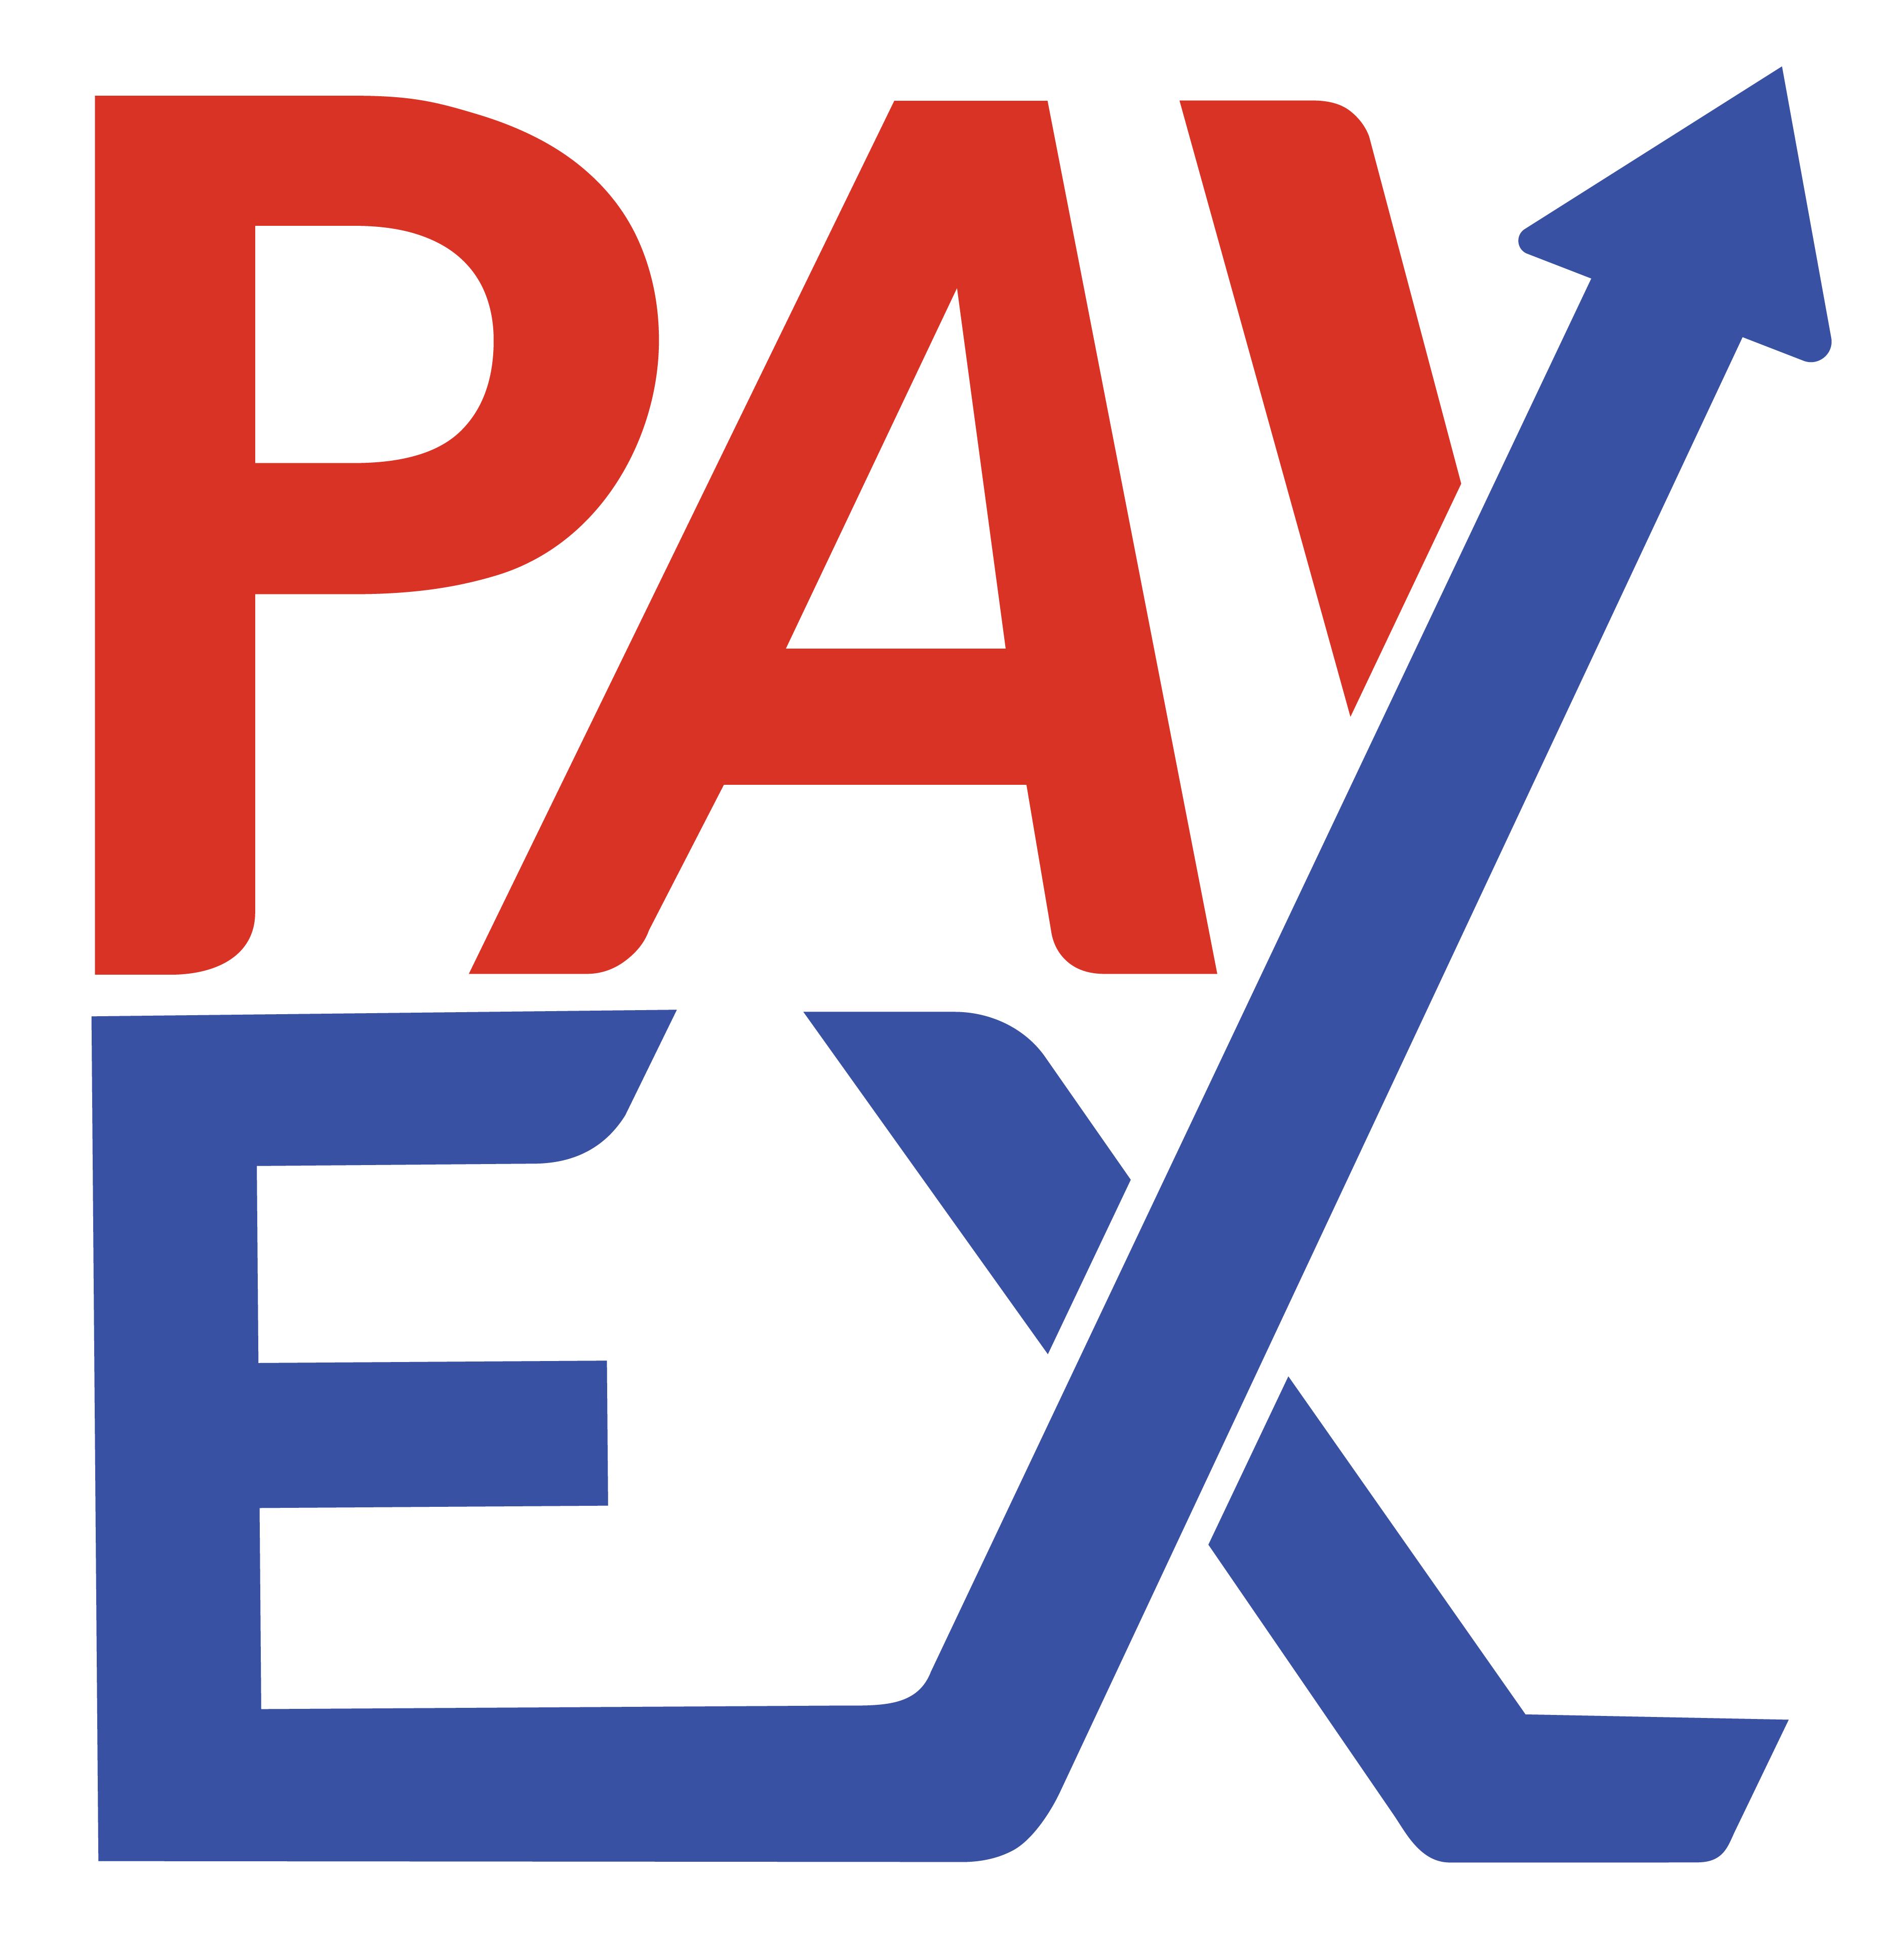 PayEX-01.png